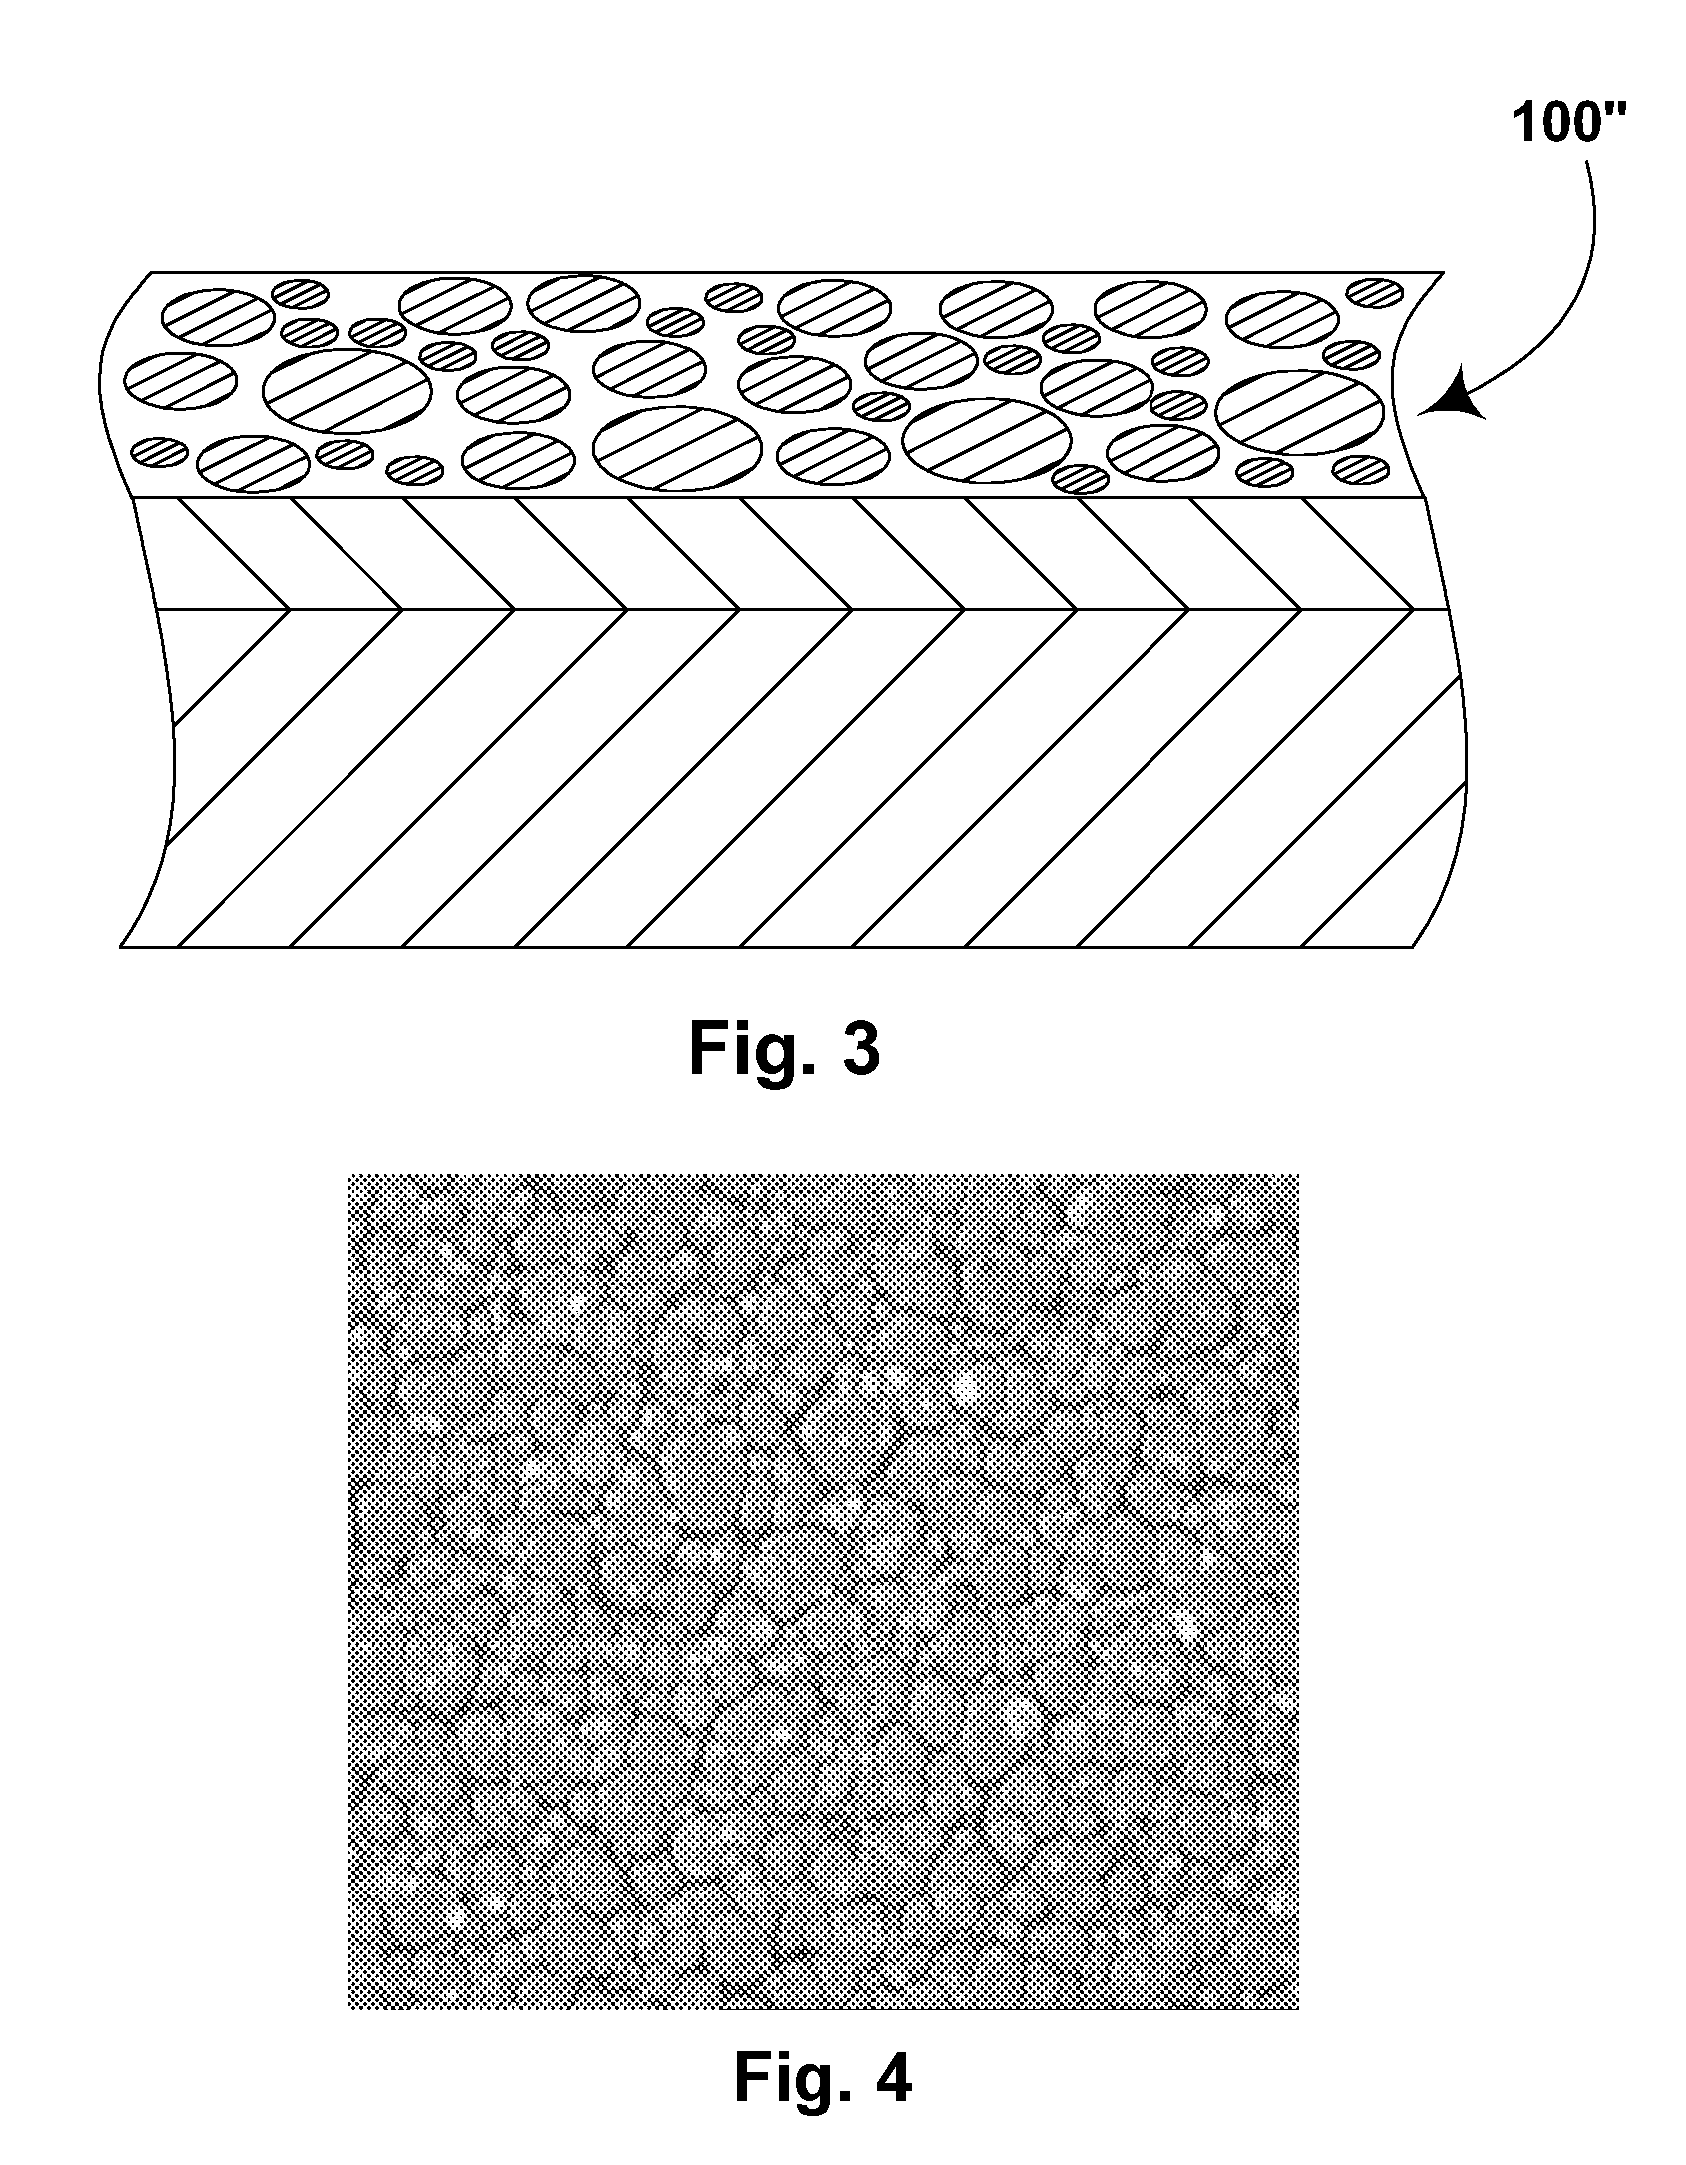 Electrophoretic medium and process for the production thereof